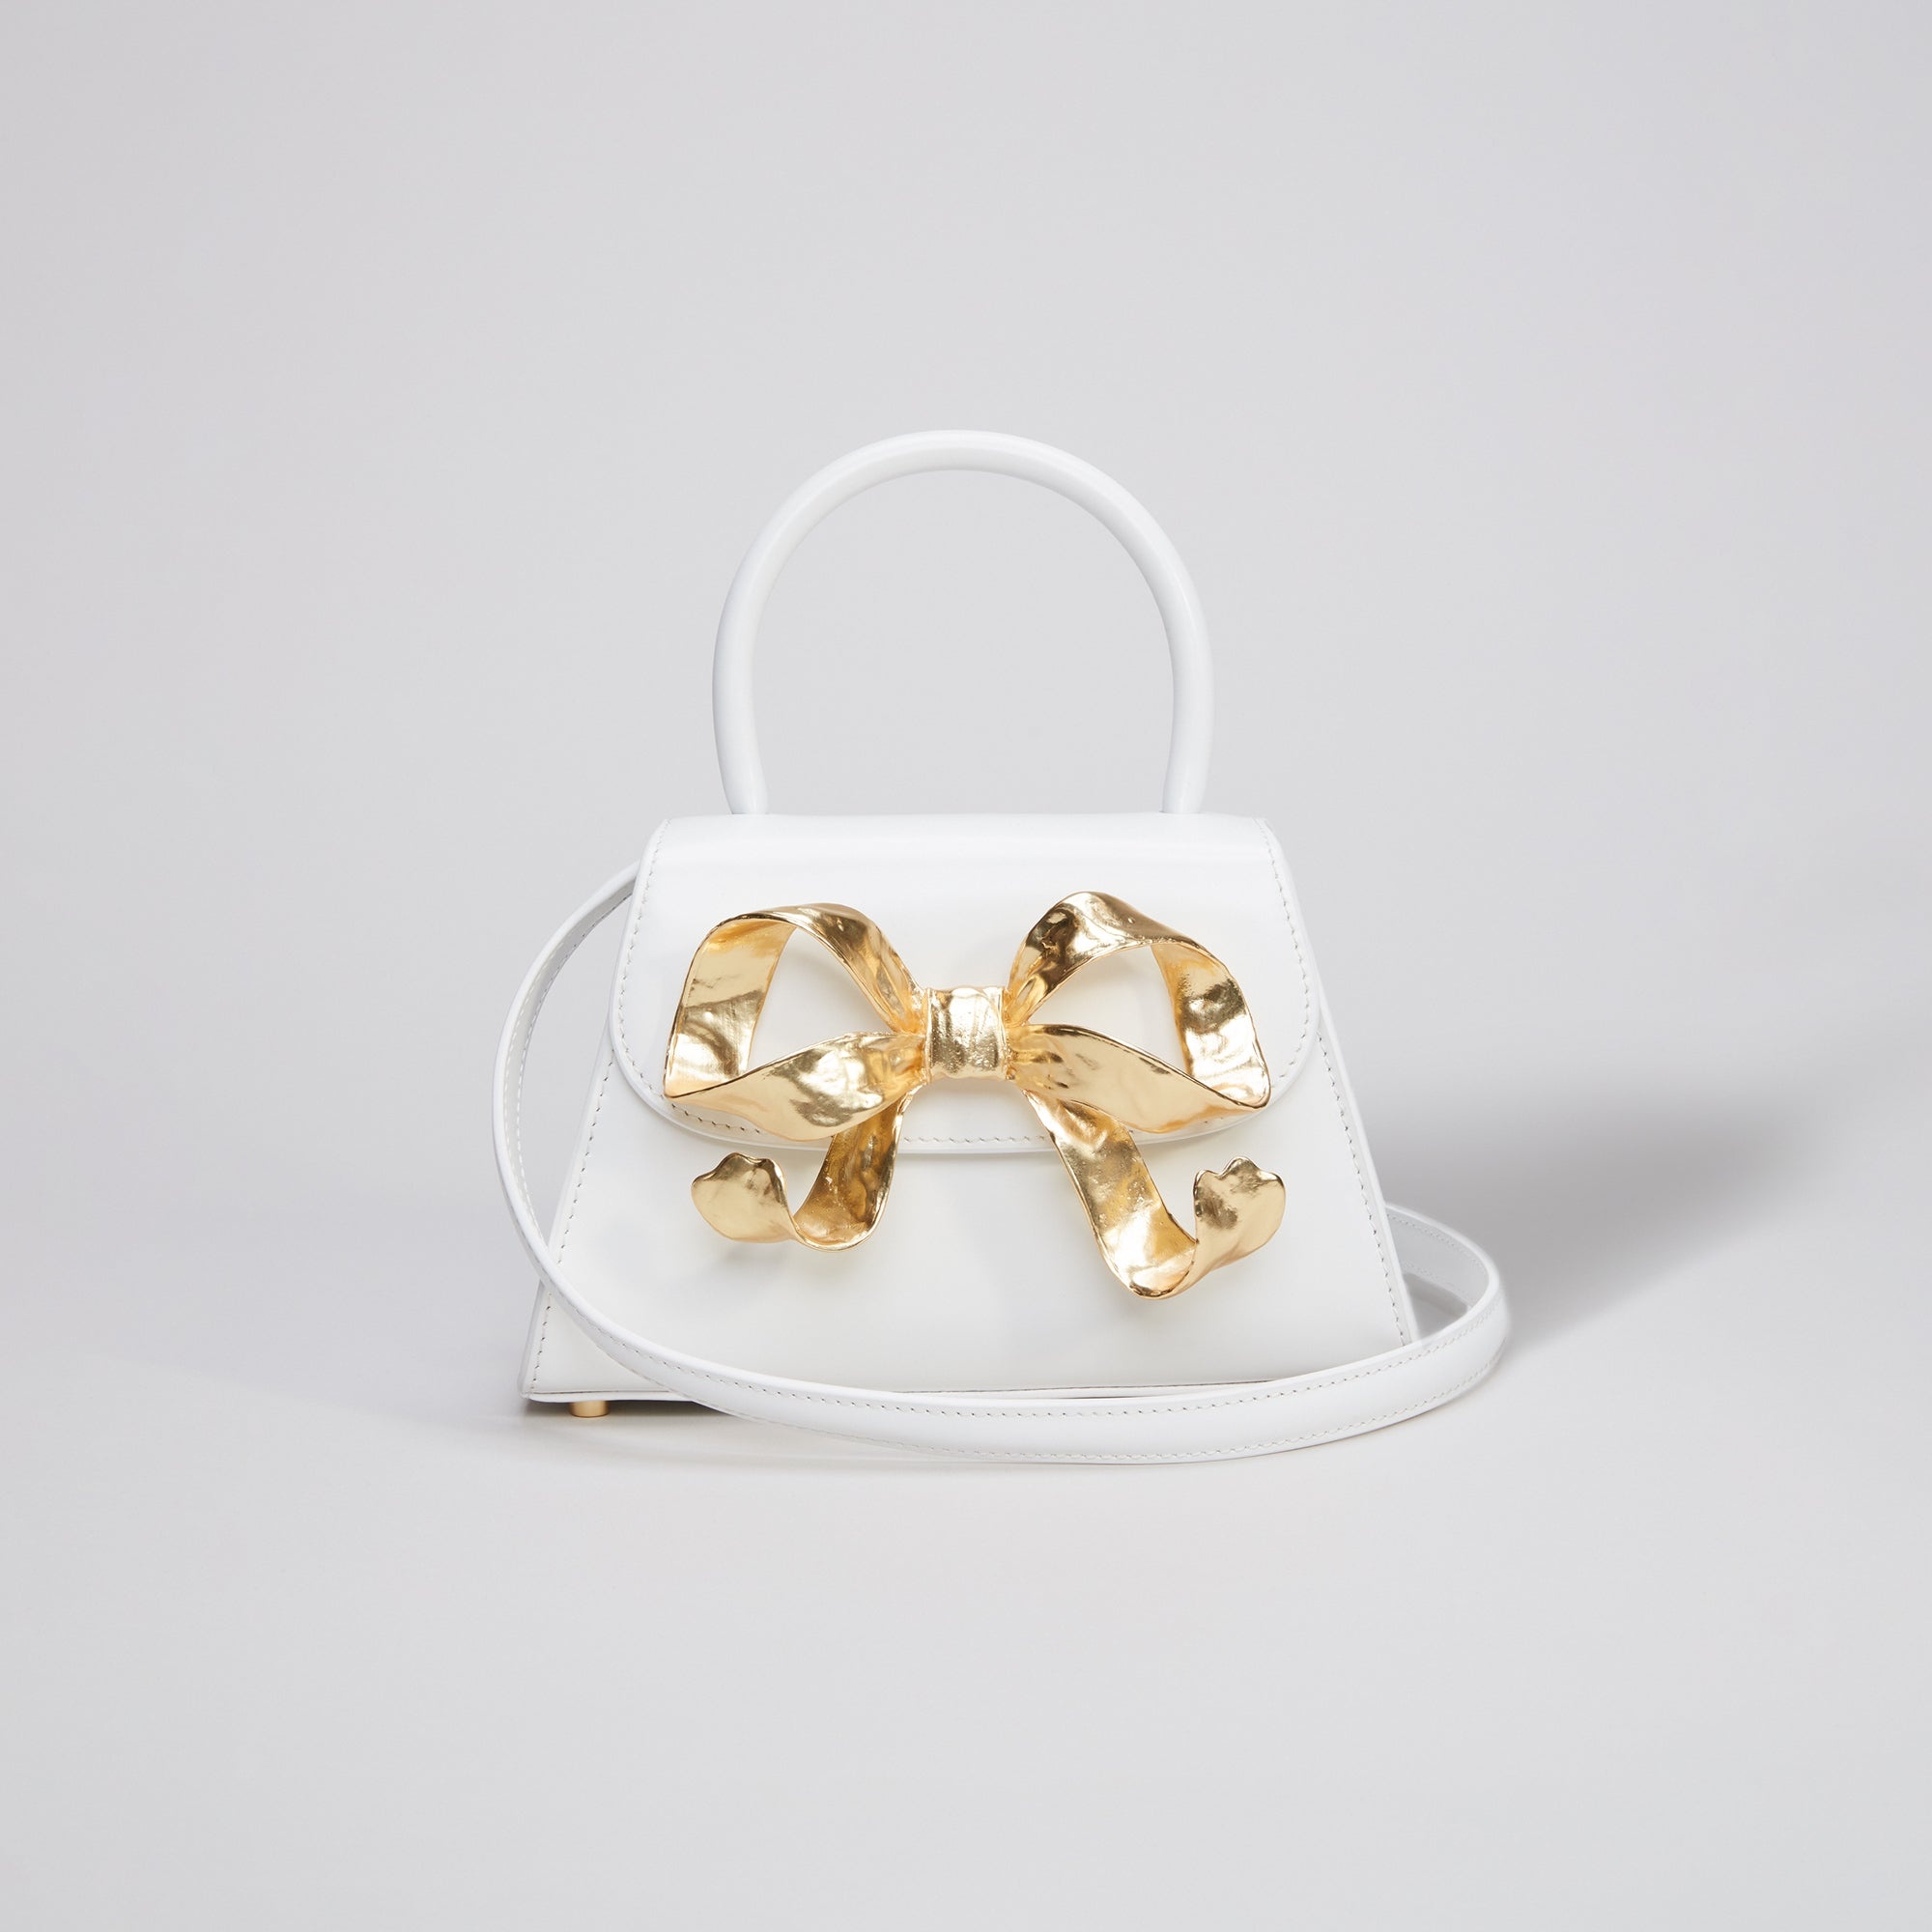 The Bow Mini in White with Gold Hardware - 4